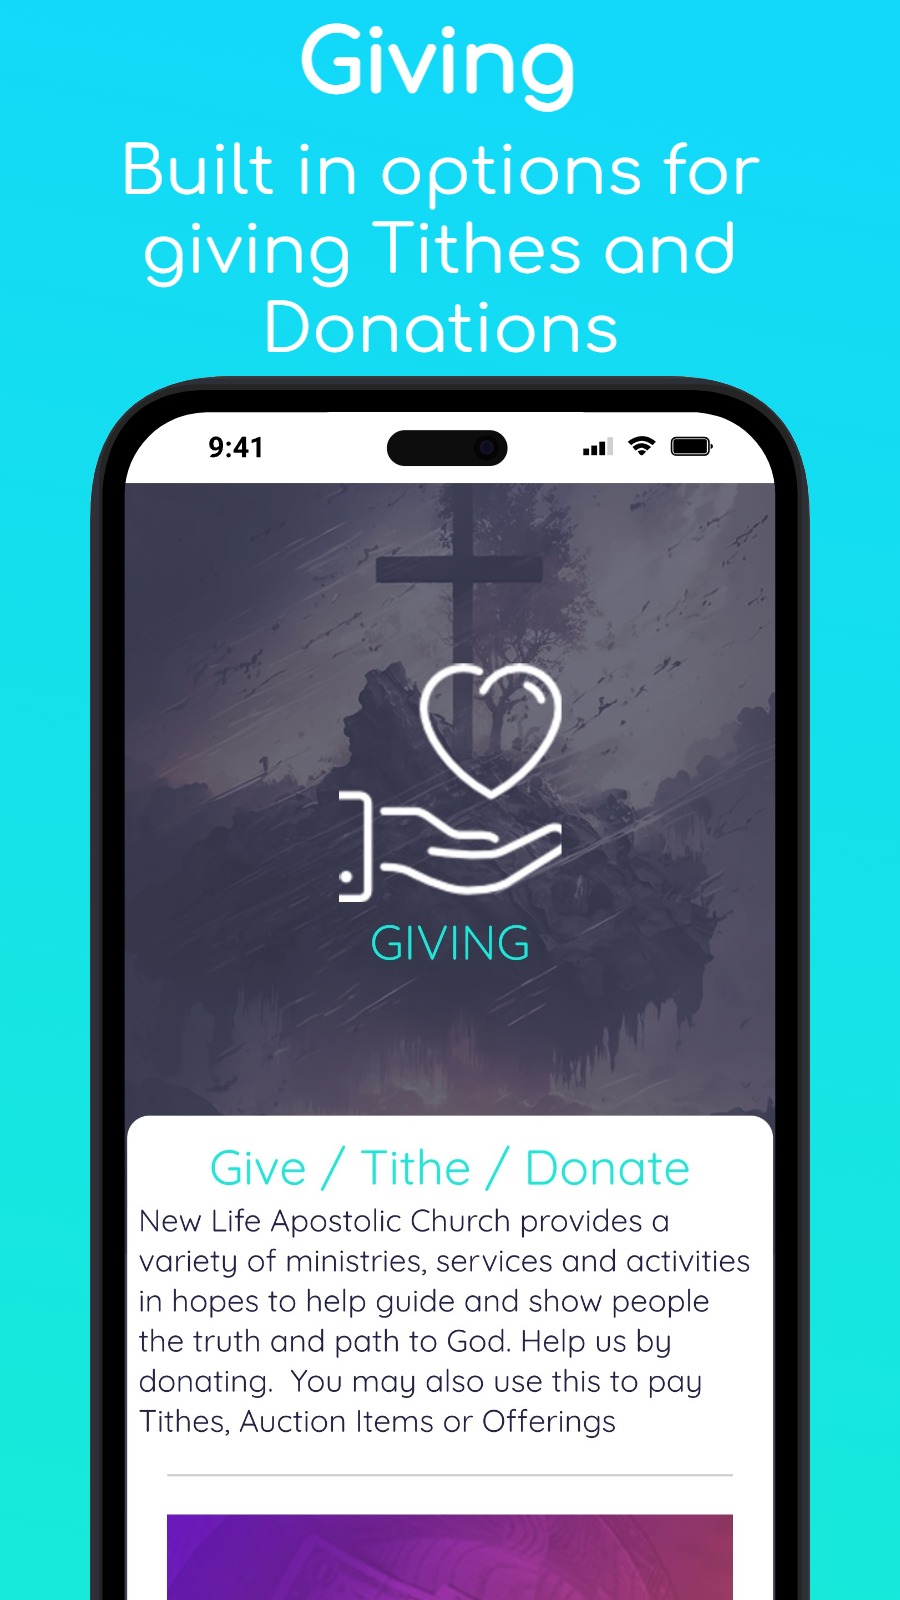 Giving - Built in options for giving Tithes and Donations